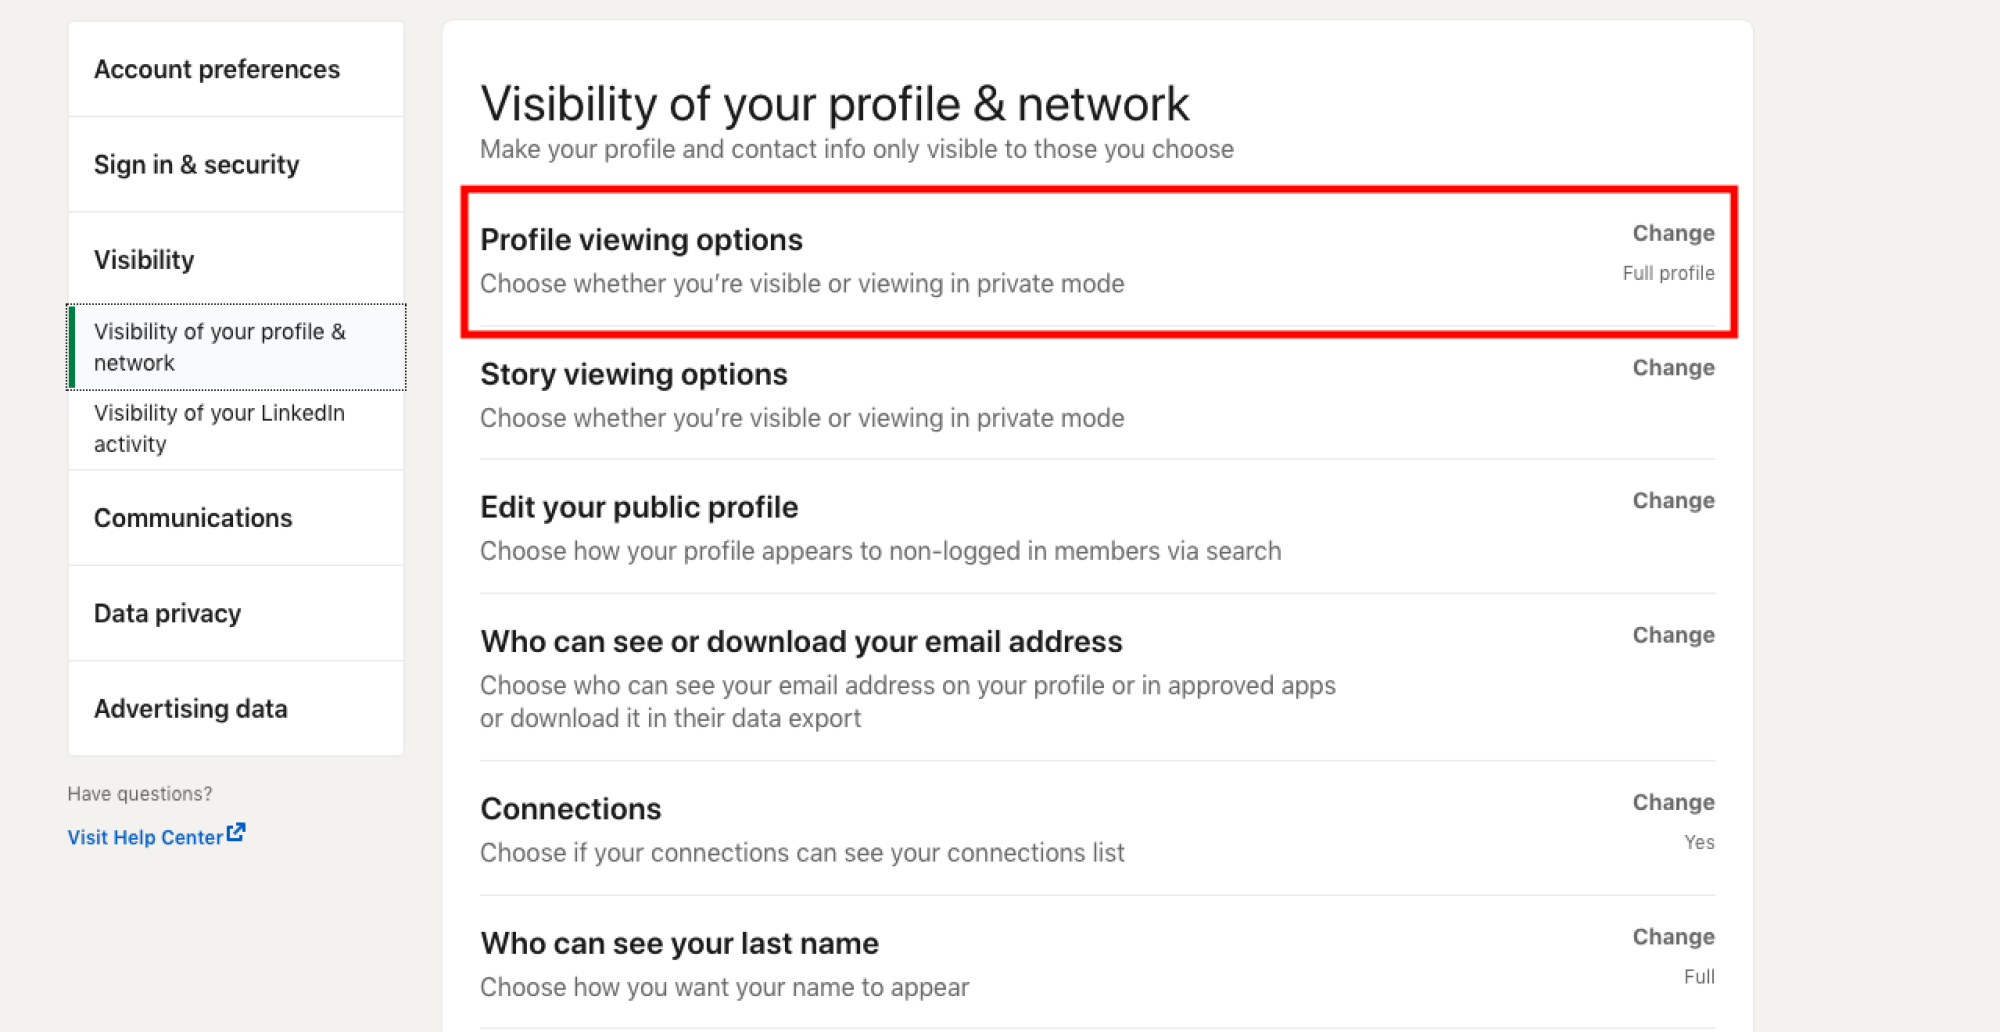 Screenshot of the LinkedIn "Visibility of your profile & network" menu with "Profile viewing options" highlighted.  